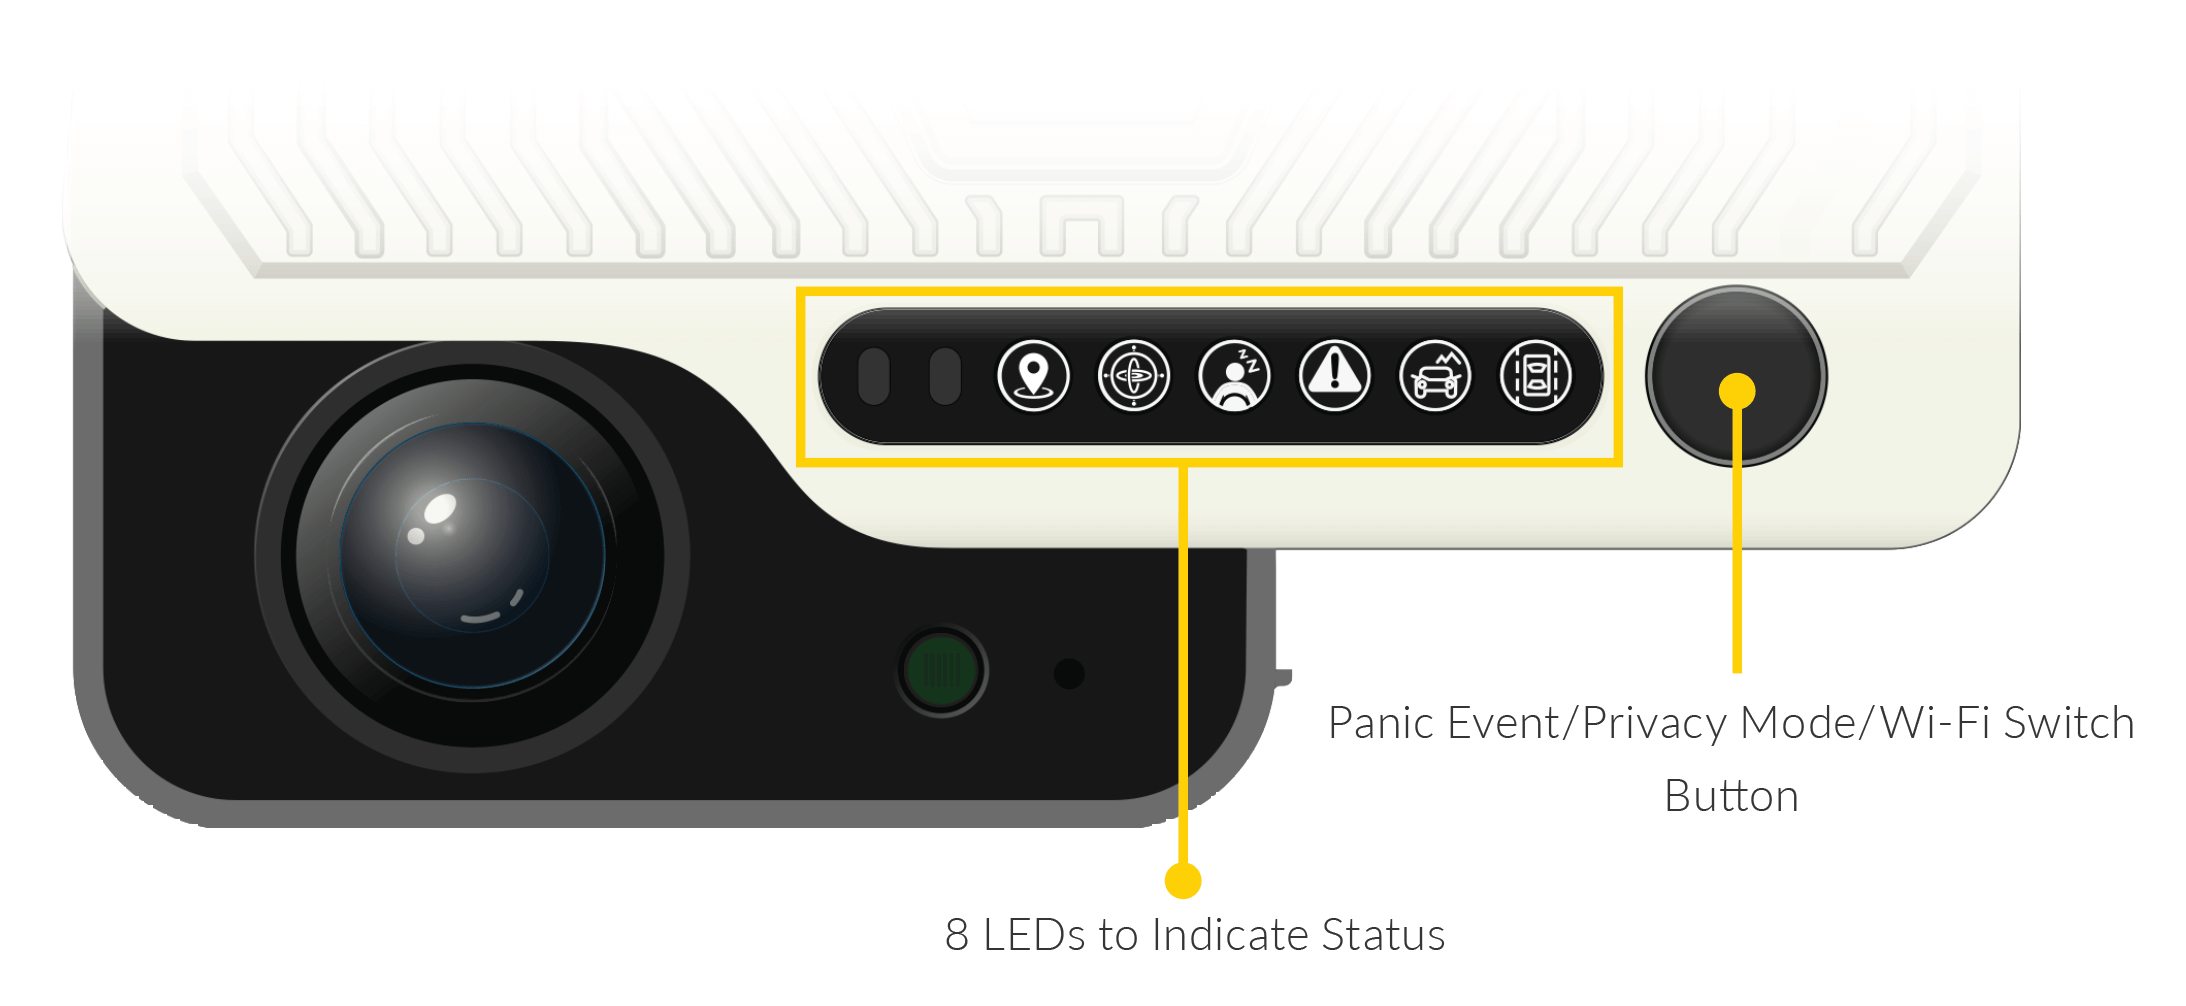 Banner highlighting the multipurpose button on the vx4ai dvr